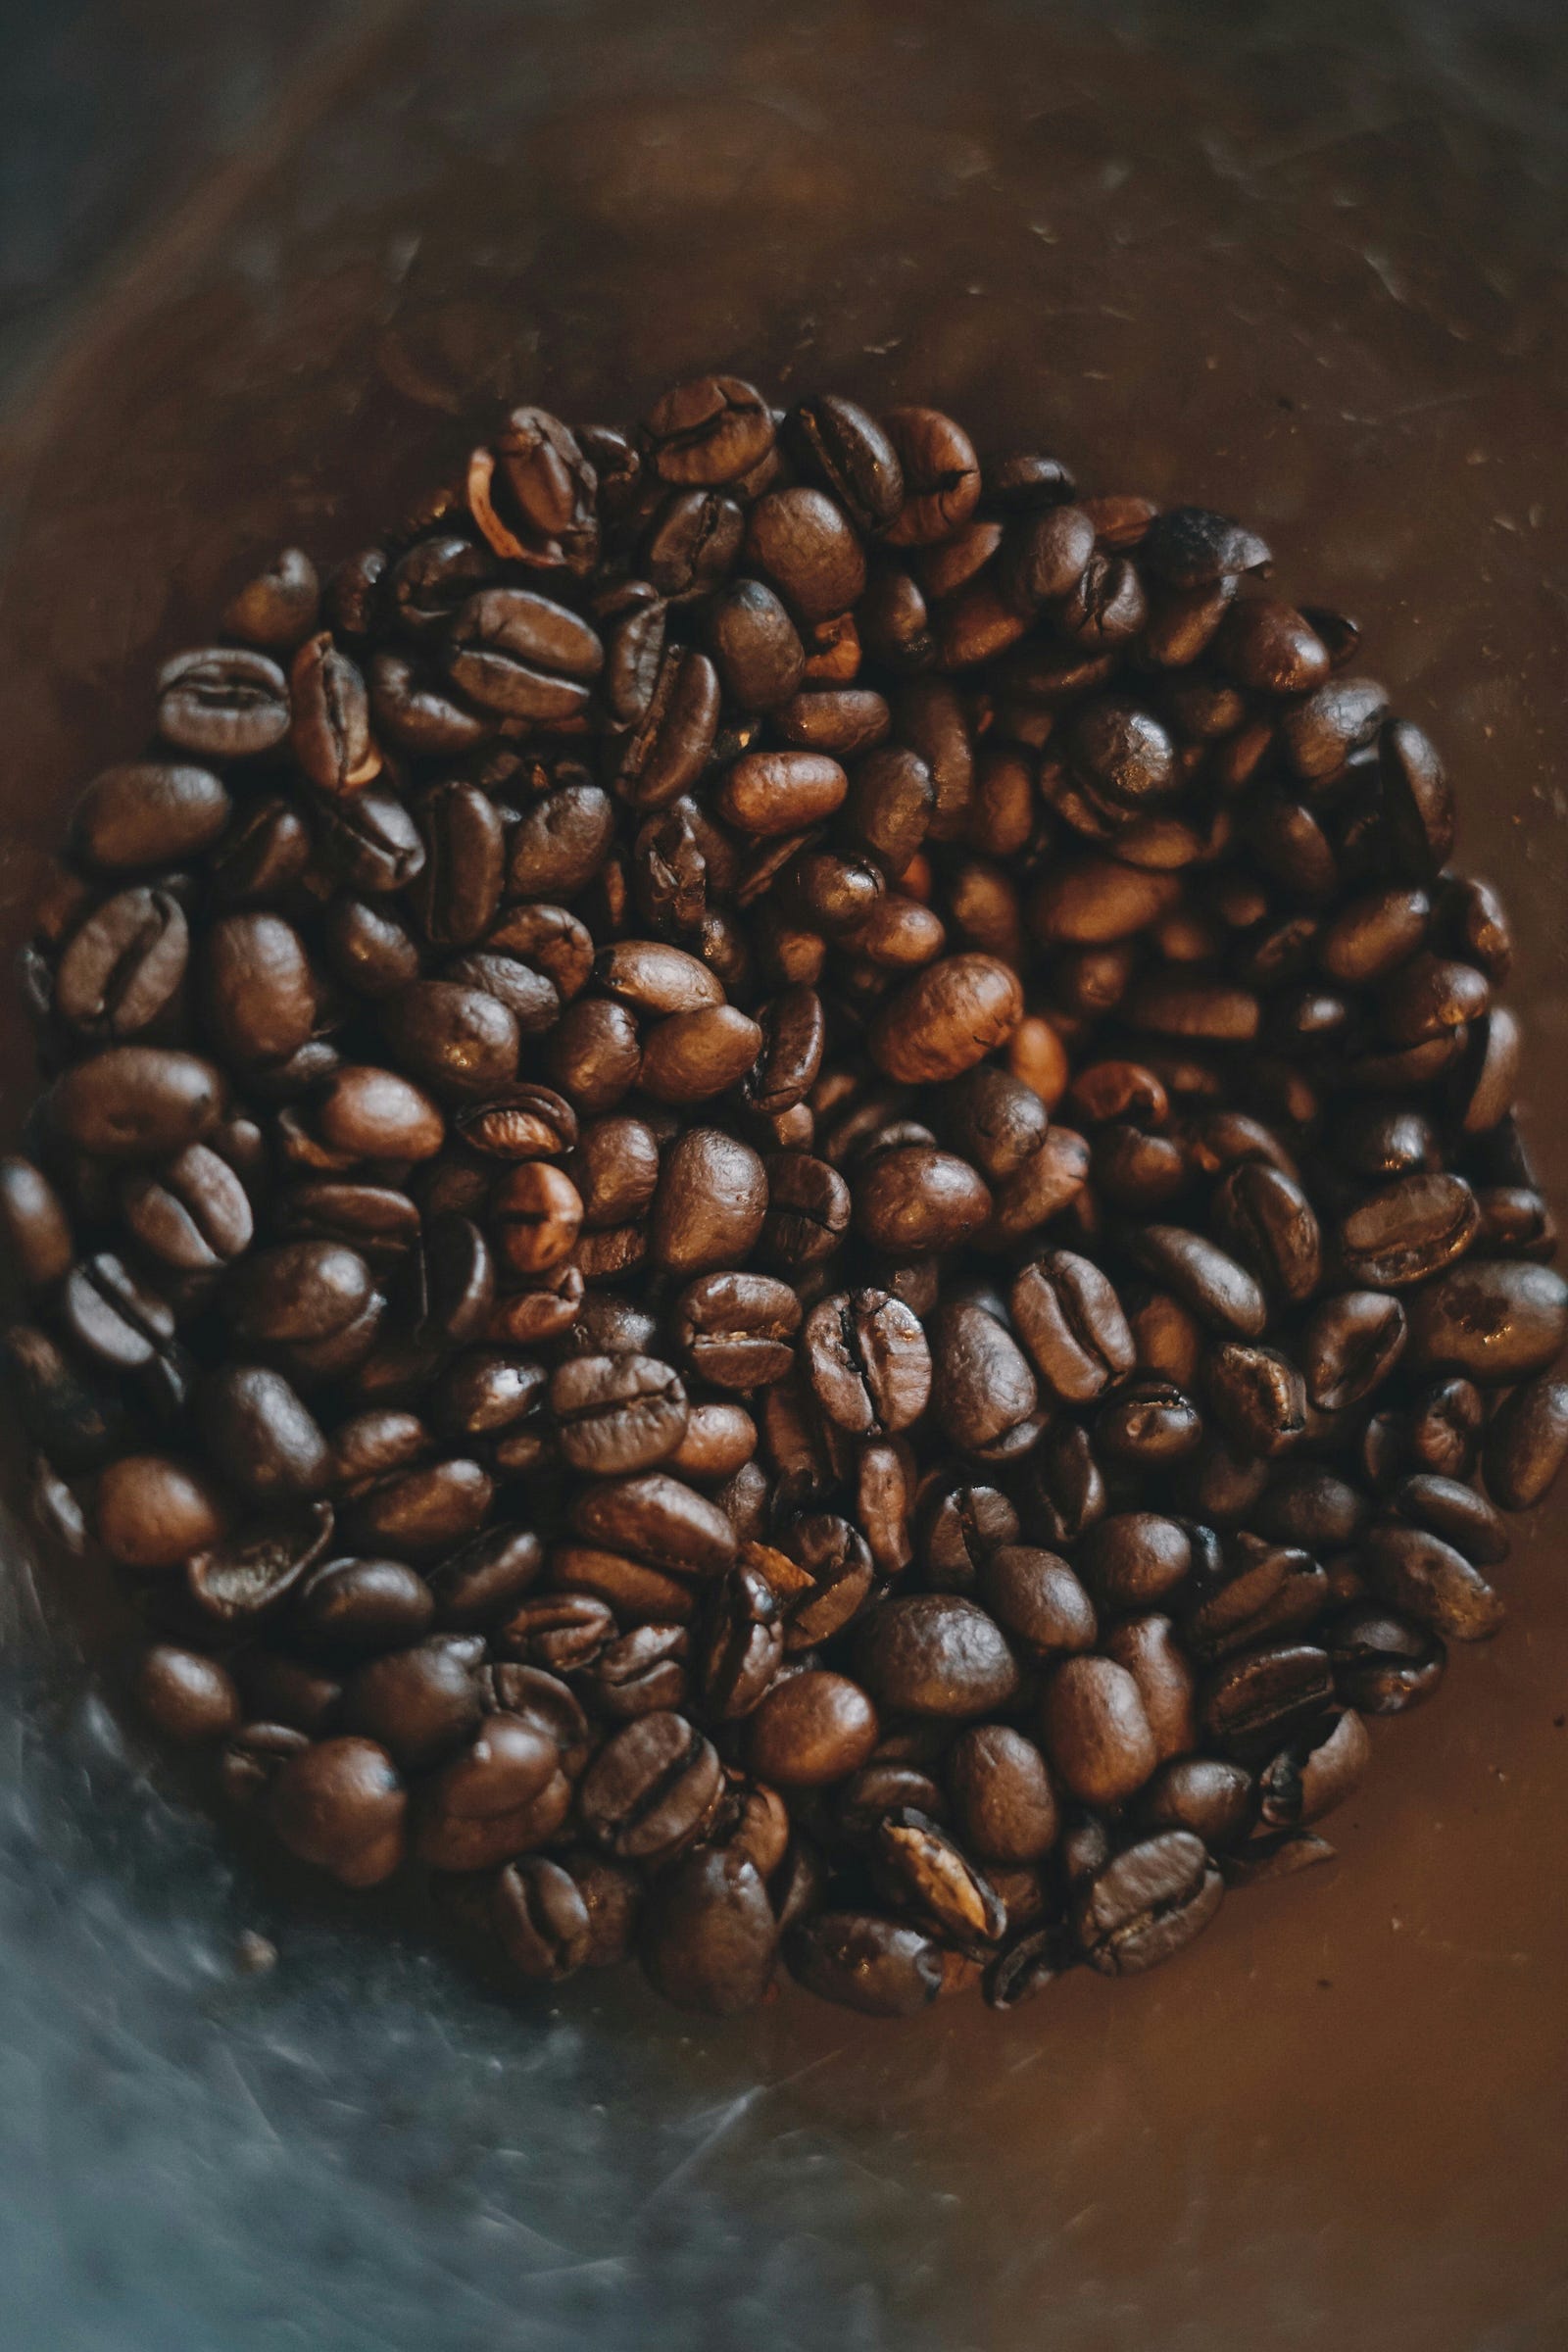 A round flat pile of coffee beans.